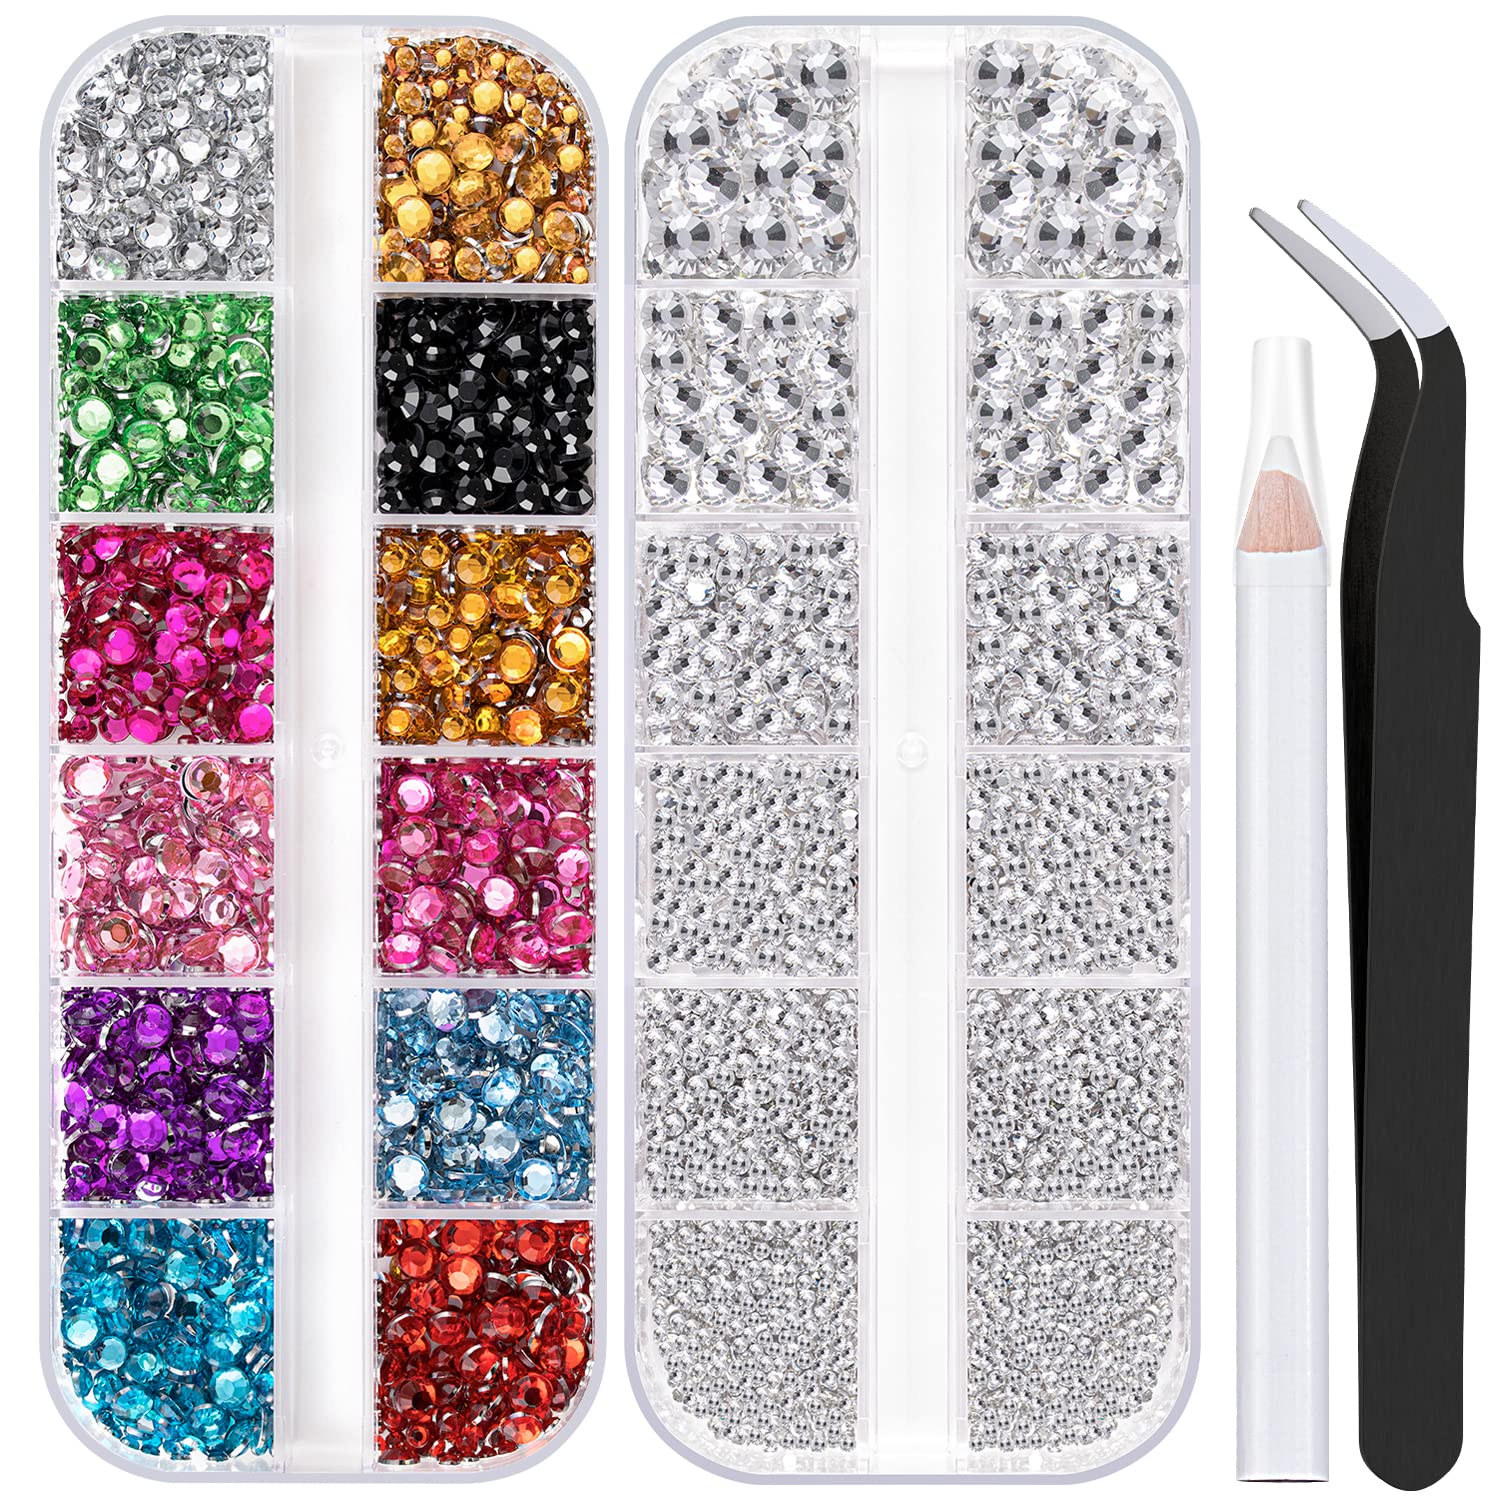  Two Boxes 4520 Pcs of Flatback Round Multiple Color Nail Art  Rhinestones Colorful Crystal Kits 12 Colors+Rose Gold Rhinestones with  Pickup Pencil and Tweezer For Home DIY and Professional Use 